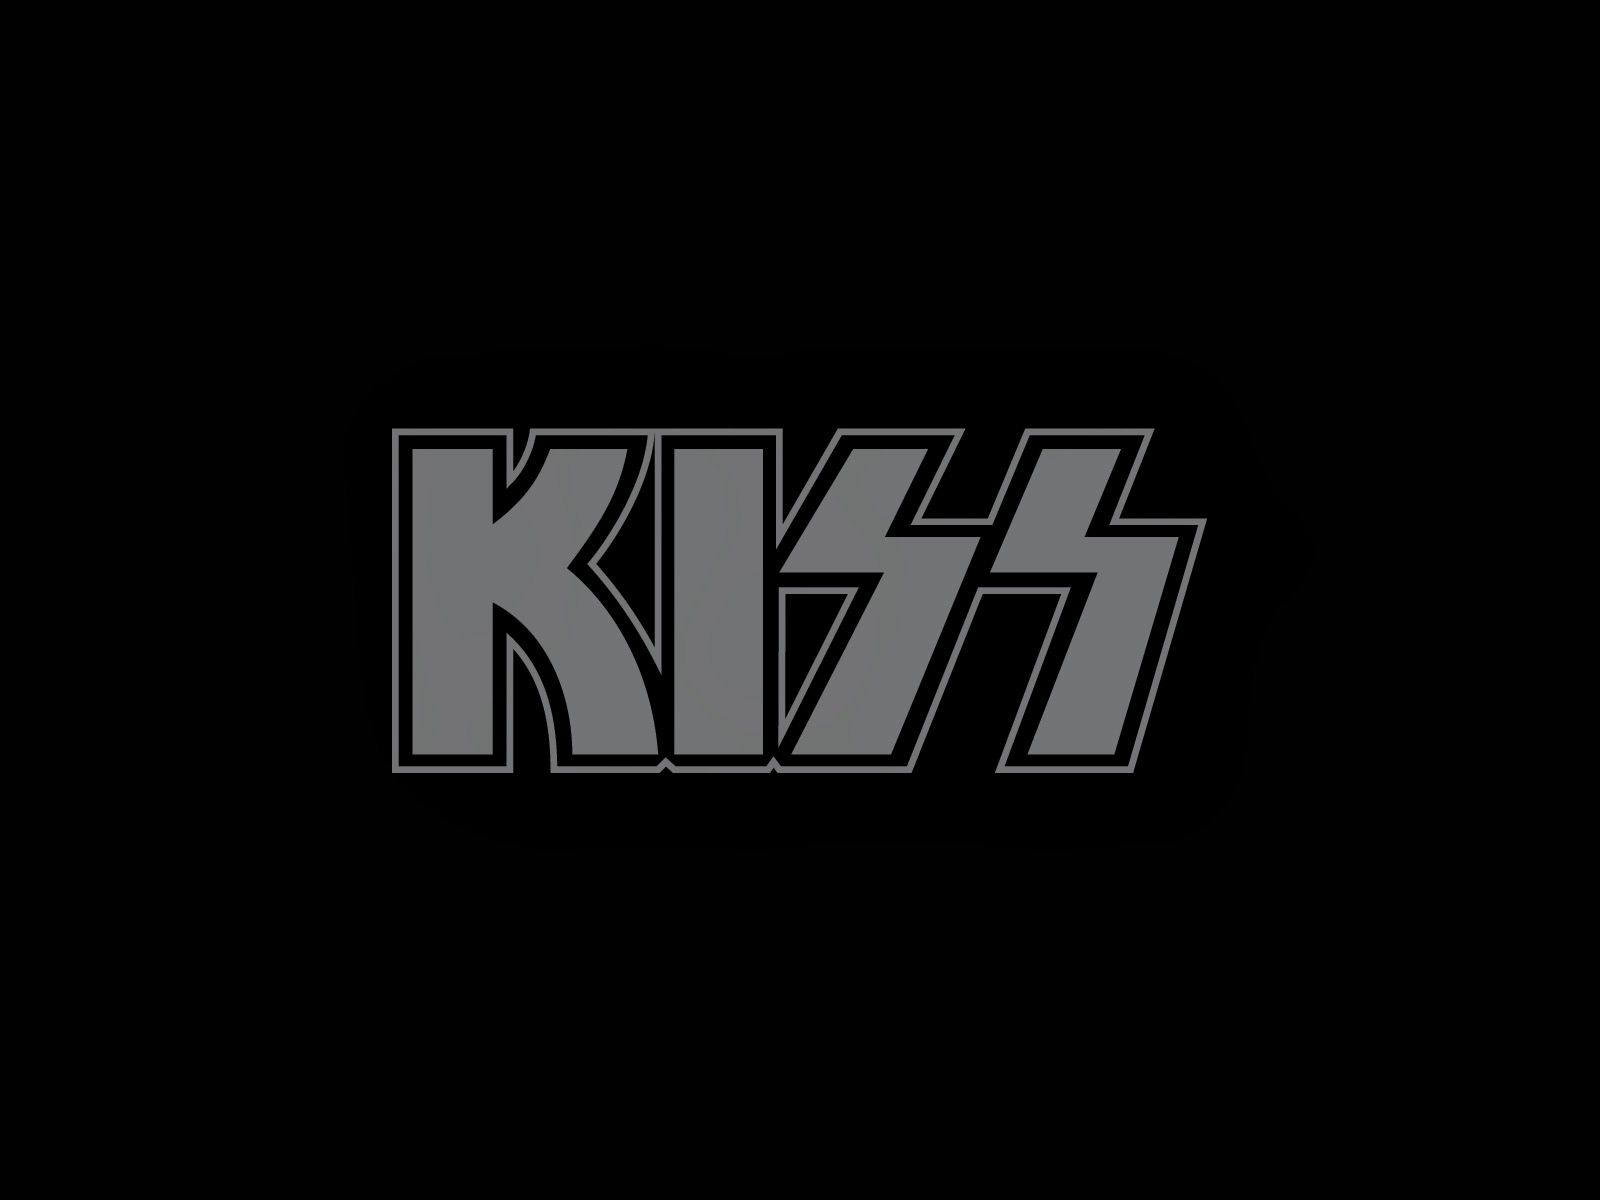 Kiss Army Chile